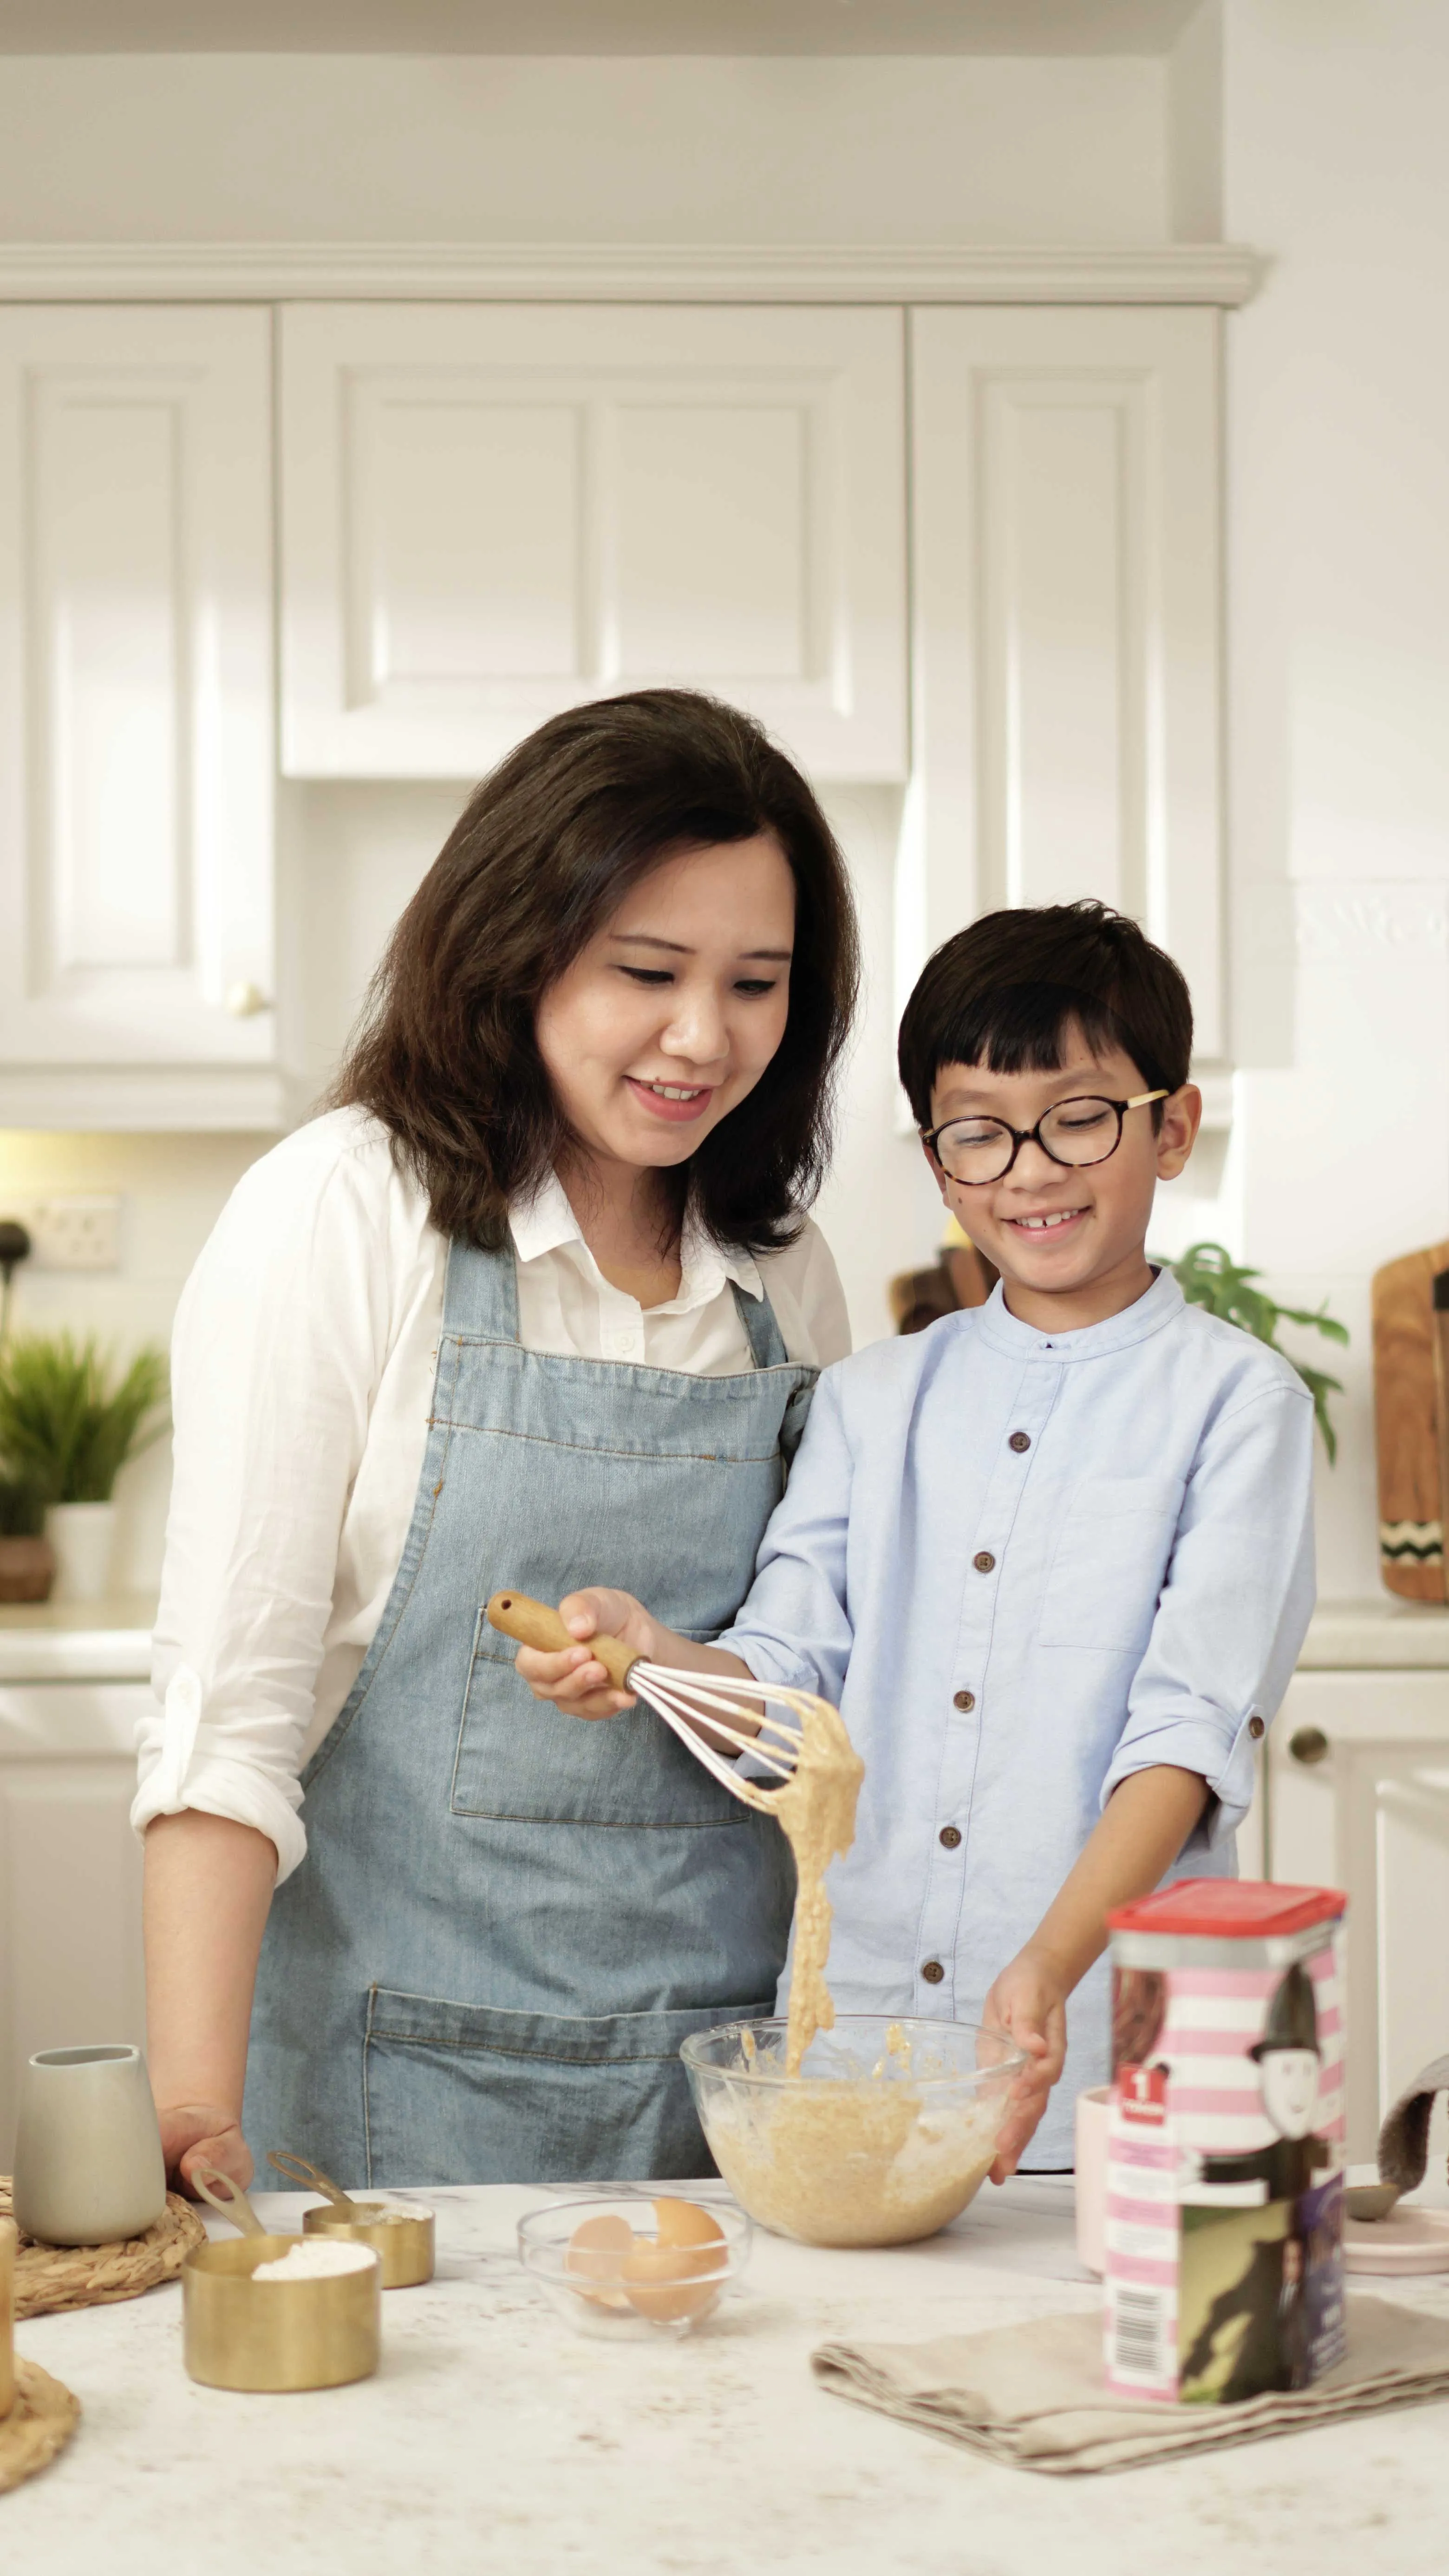 Khin in the kitchen with her son.